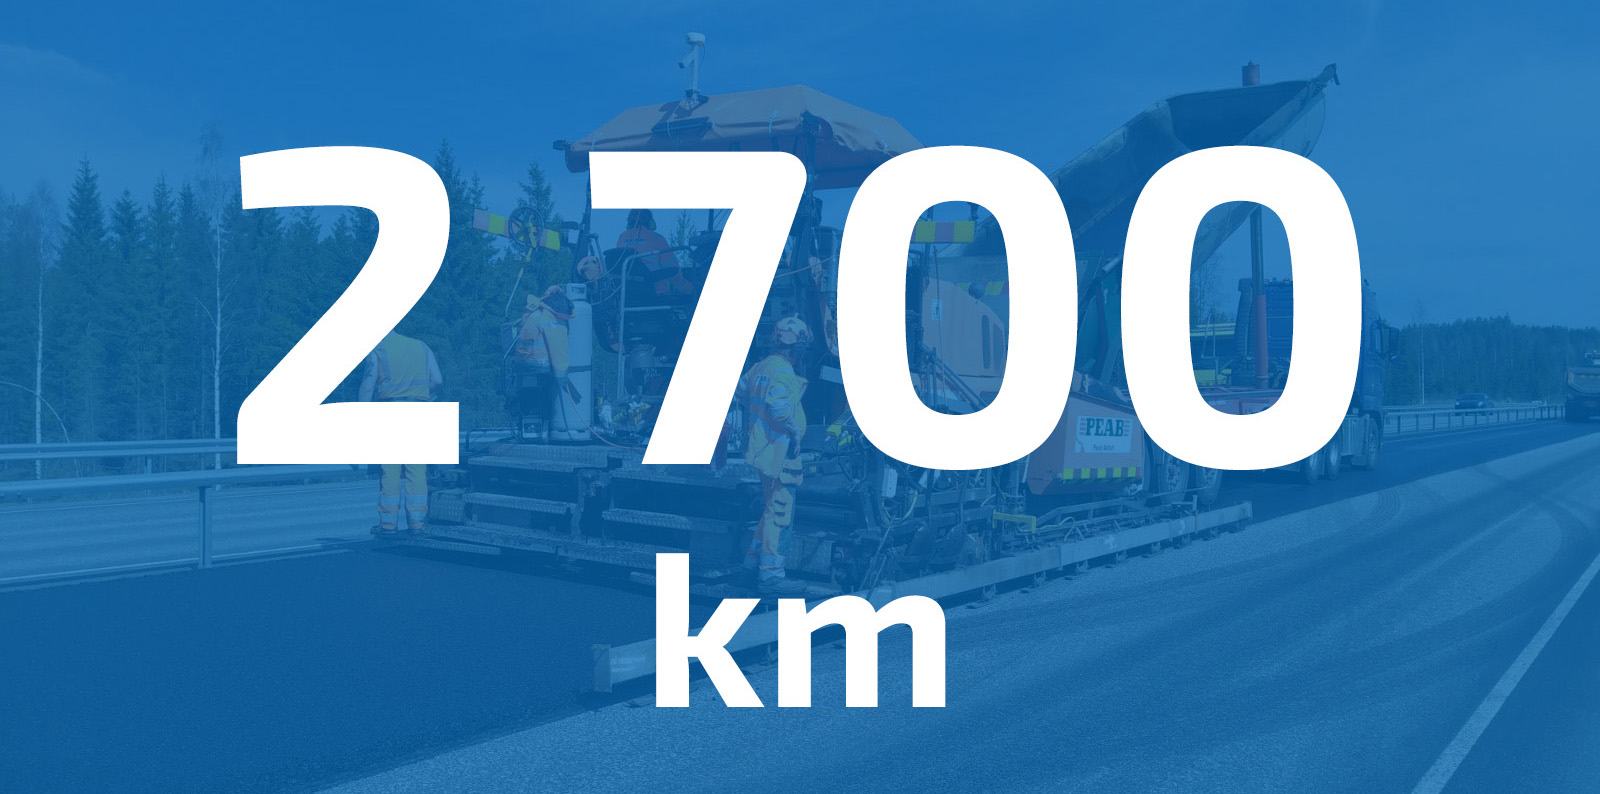 Road construction and number 2,700 kilometres.